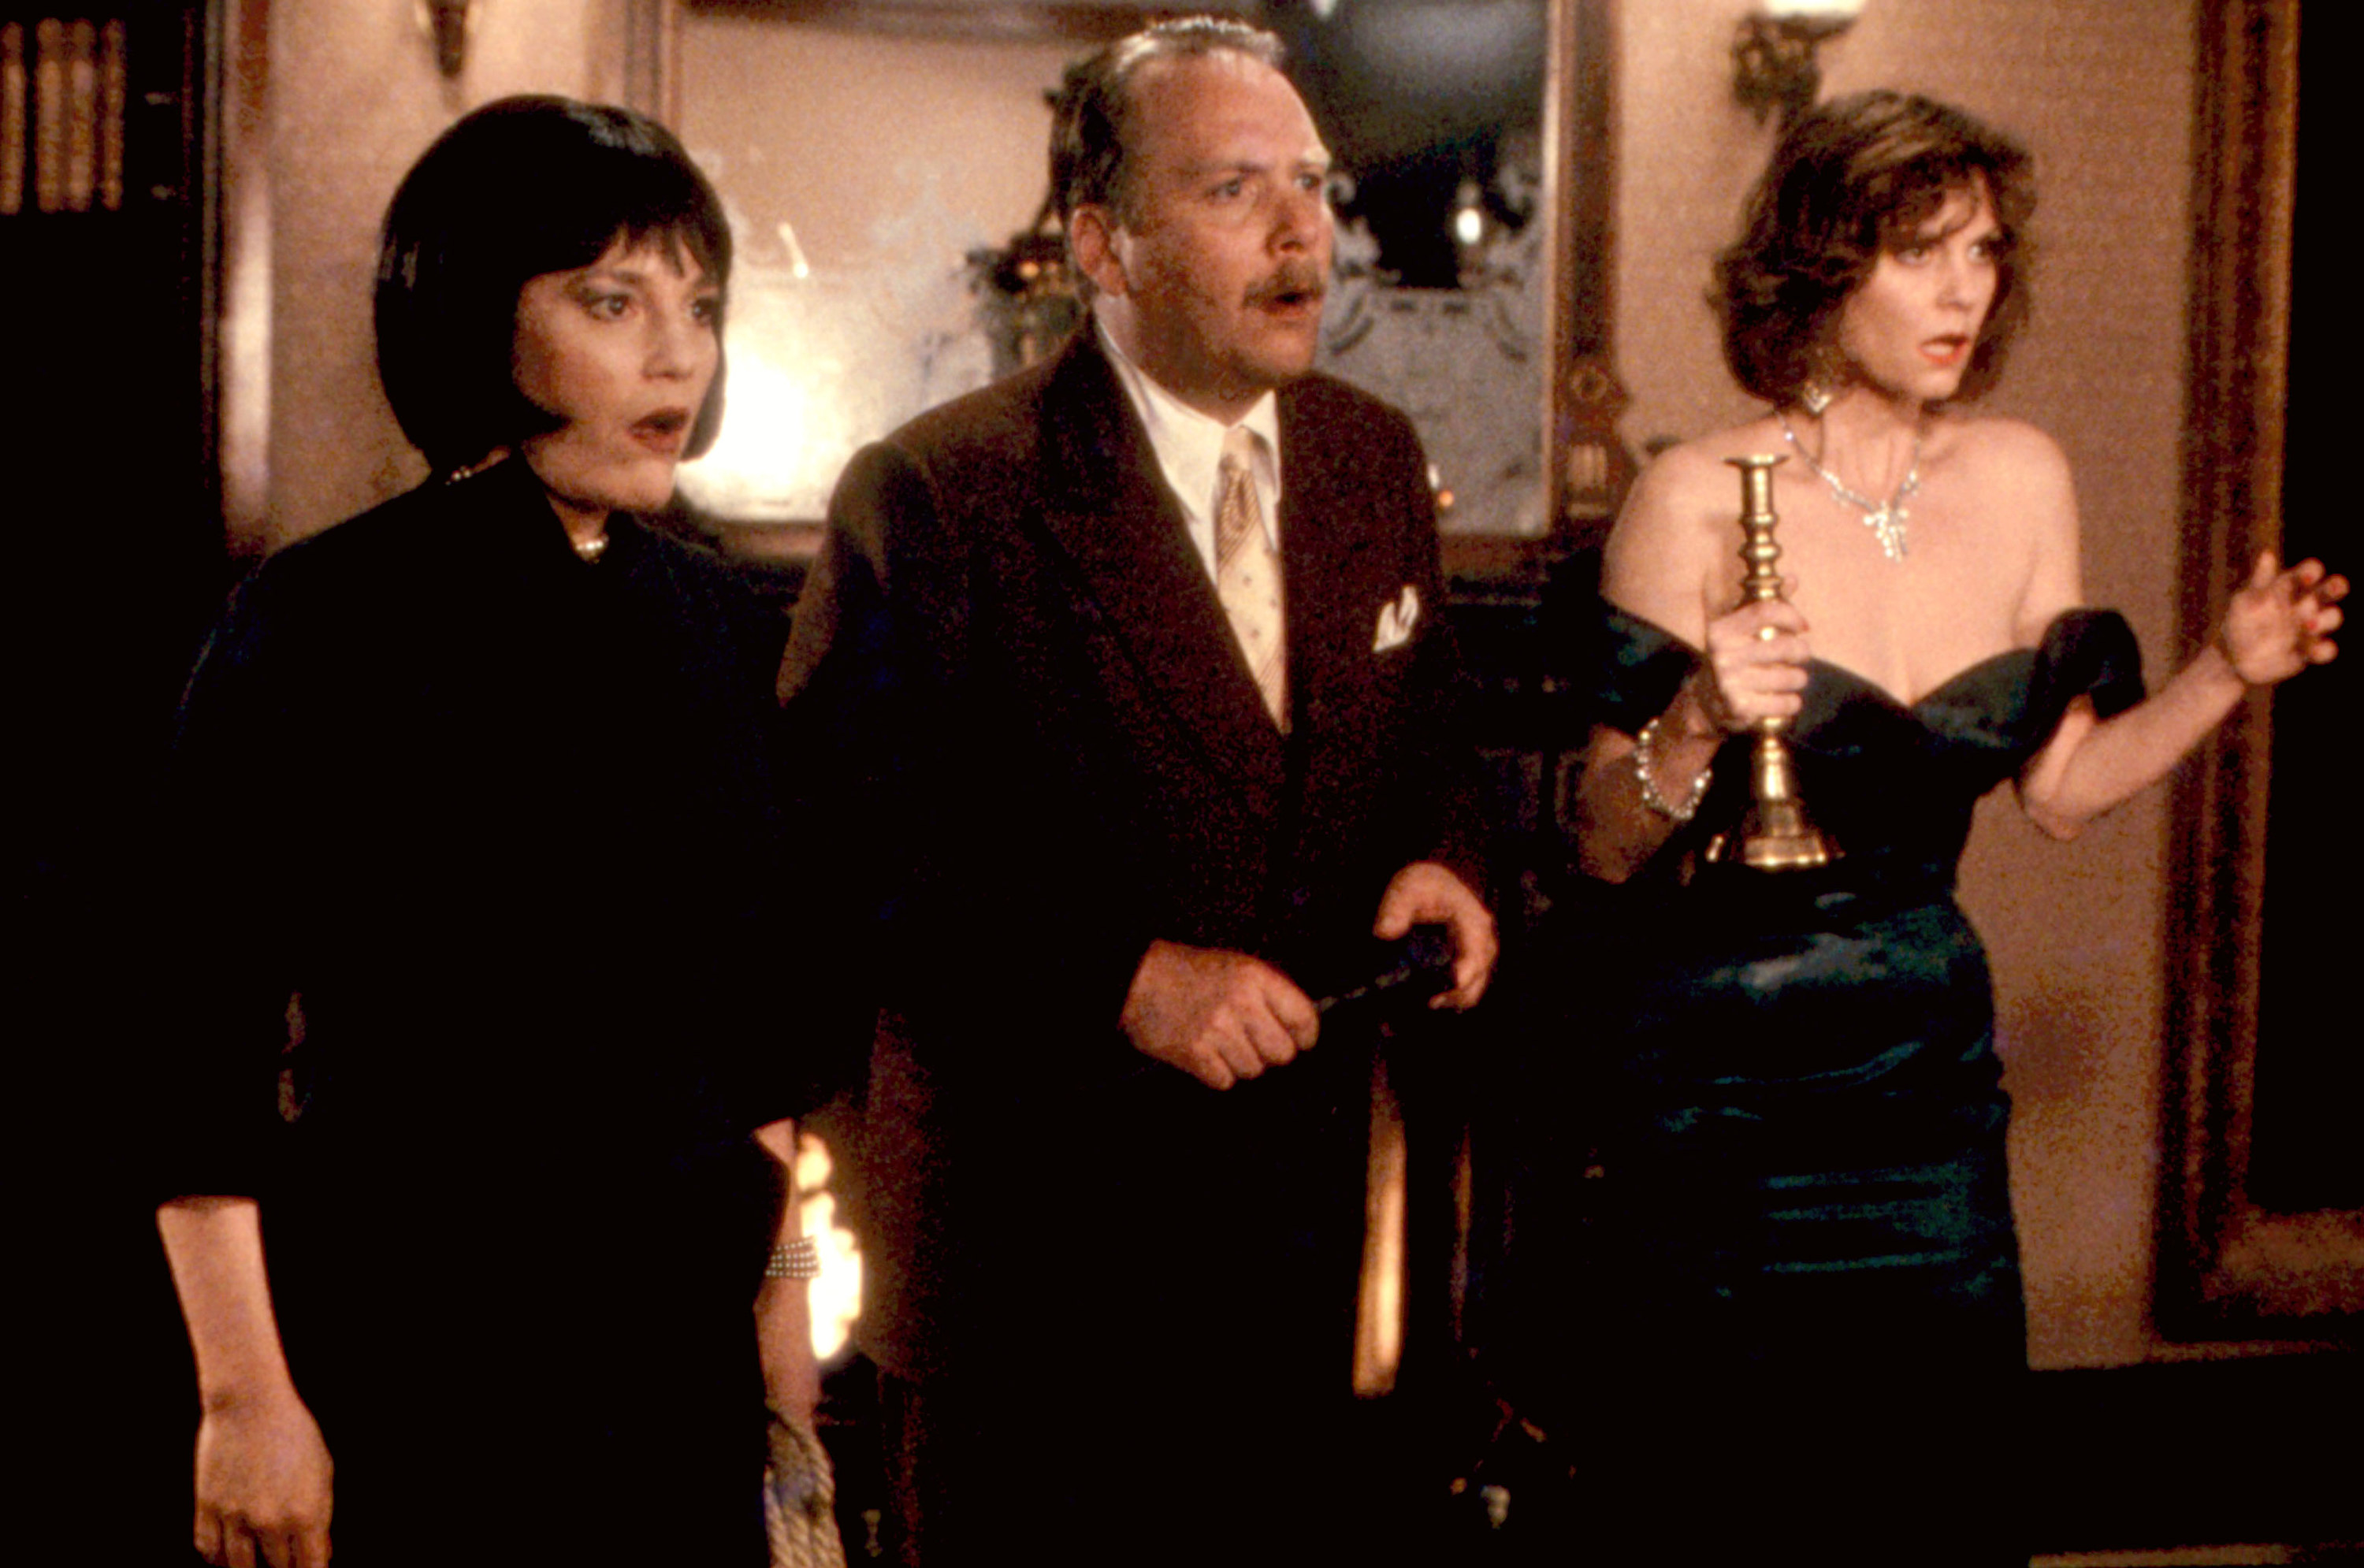 Madeline Kahn, Martin Mull, and Lesley Ann Warren stand in a room